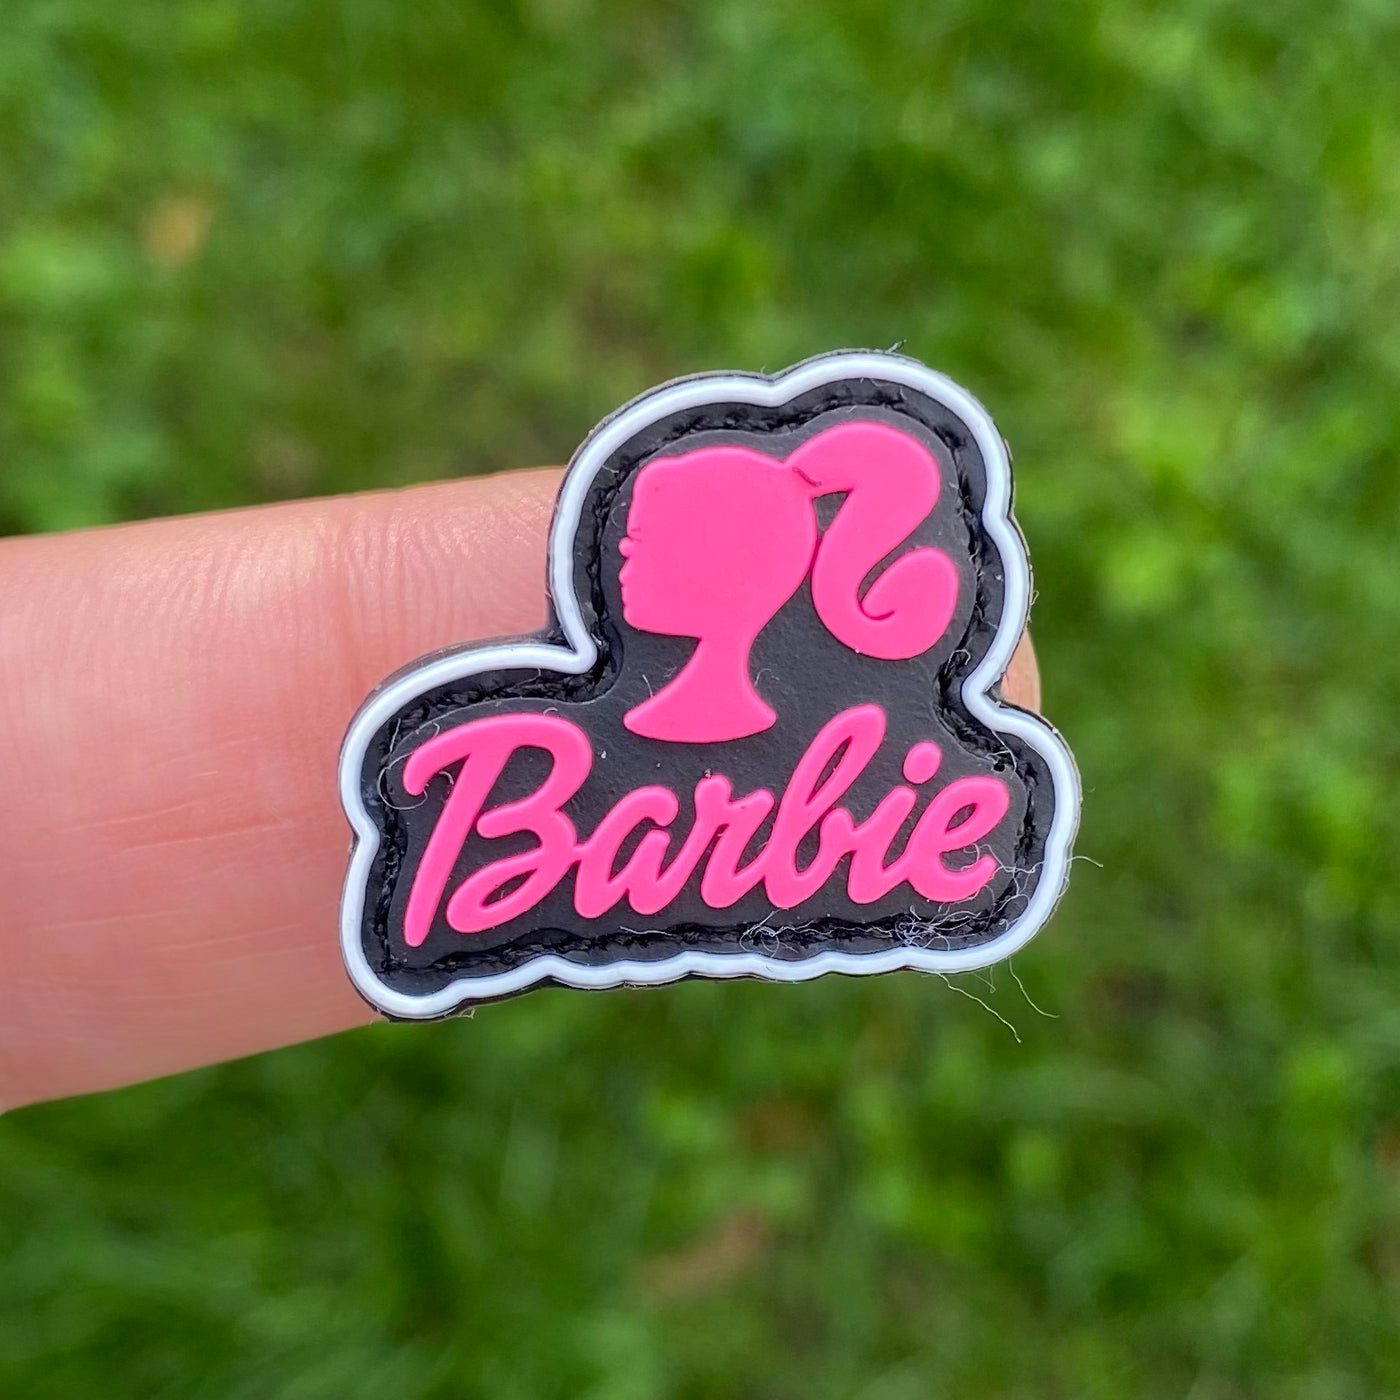 The Barbie patch